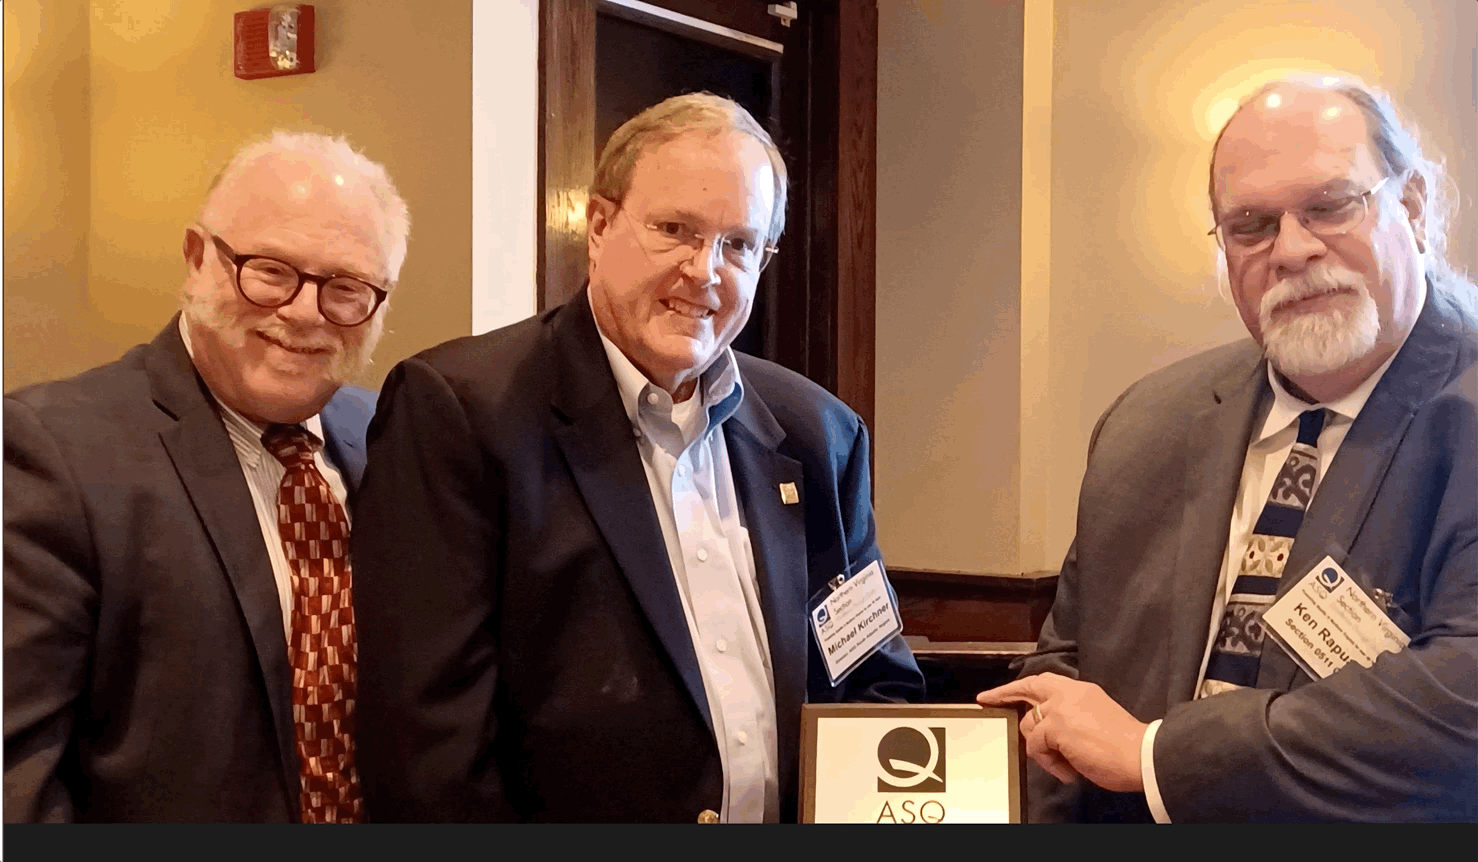 Region 5 Chair Michael Kirchner, with the 40th Anniversary Committee, Jeff Parnes and Kenneth Rapuano, holding the 40th Anniversary Plaque